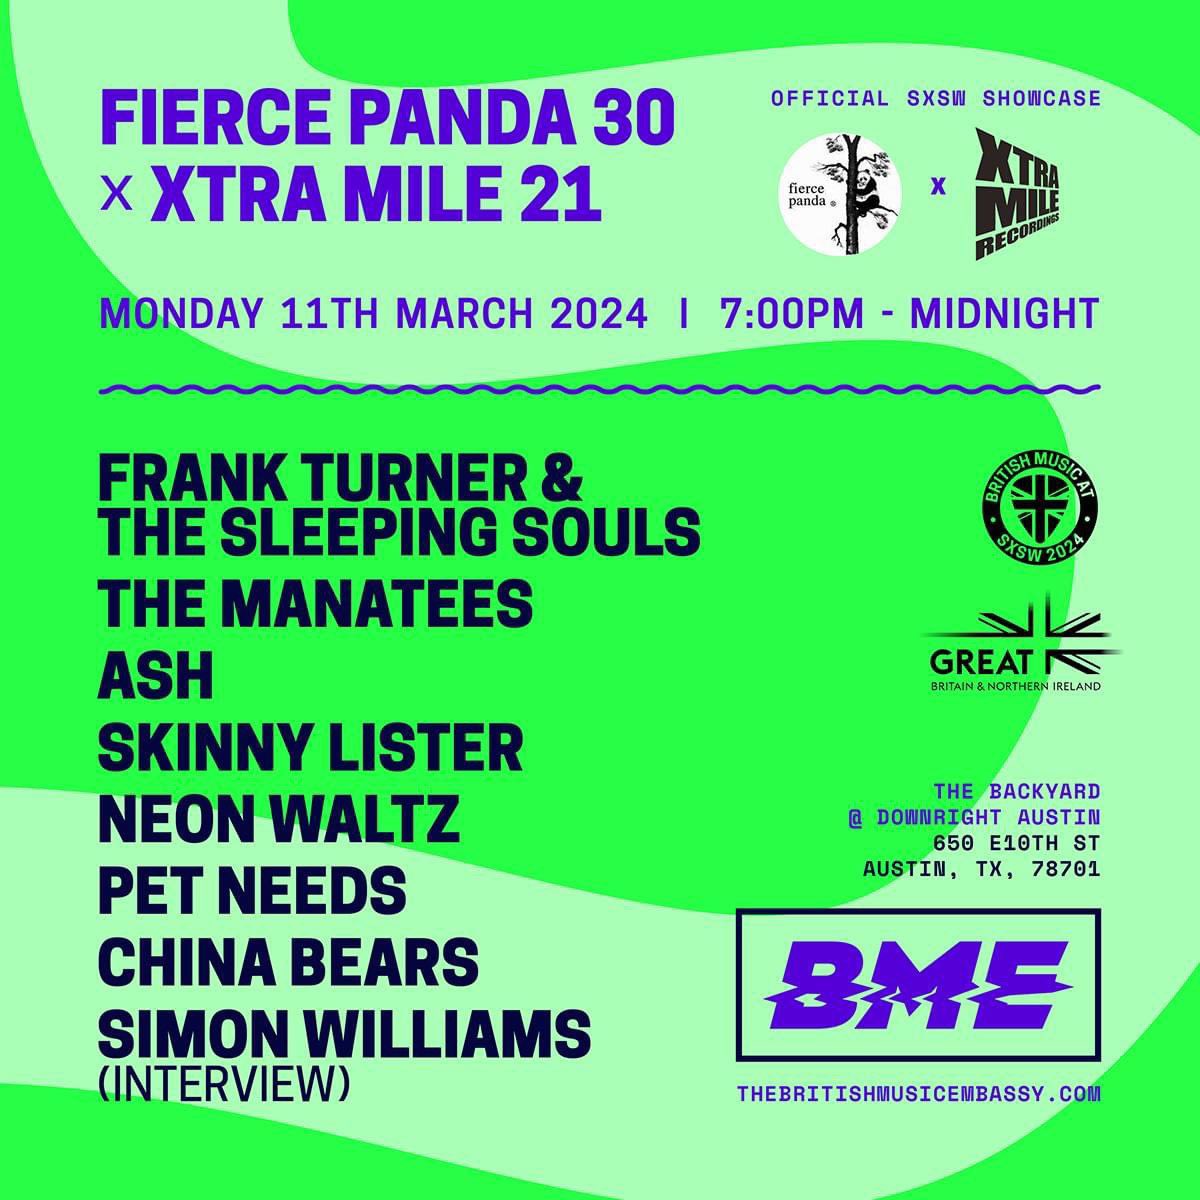 🇺🇸Next week we’ll be @sxsw taking over the @britishmusicbiz stages with some of our bands @ashofficial @neonwaltz @chinabearsband @Themanateesband + Simon Panda will be interviewed about 30 years of Fierce Panda +we’ve teamed up w/ @Xtra_Mile who are bring more bands to the party